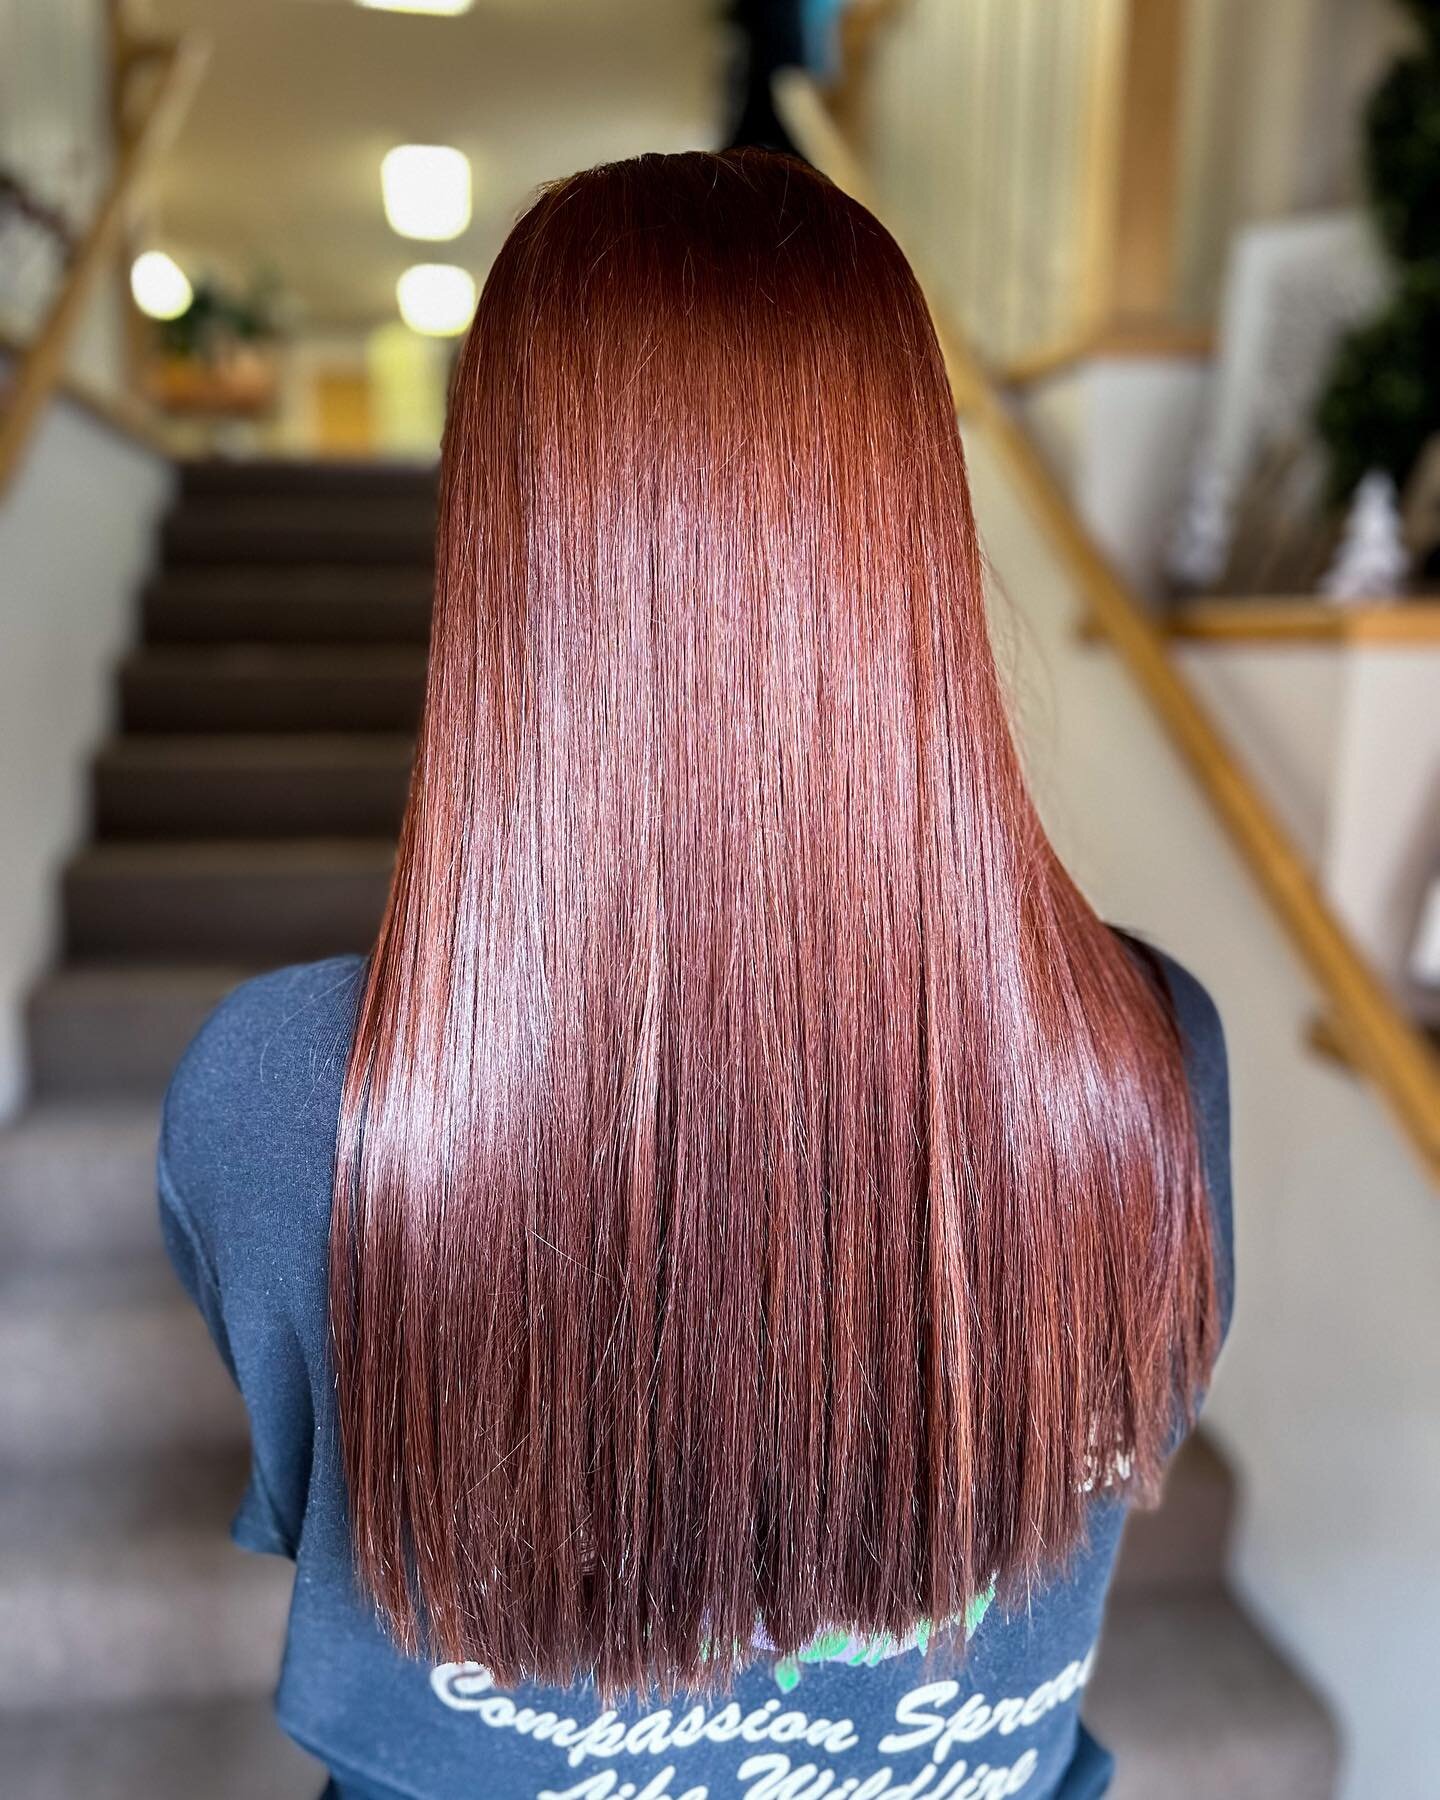 ❤️Let's start with the basics. A hair gloss is a versatile professional haircolor service offered here in the salon. Perfect for refreshing color and enhancing your hair's natural shine, Redken's Shades EQ Gloss also leaves you with healthier looking